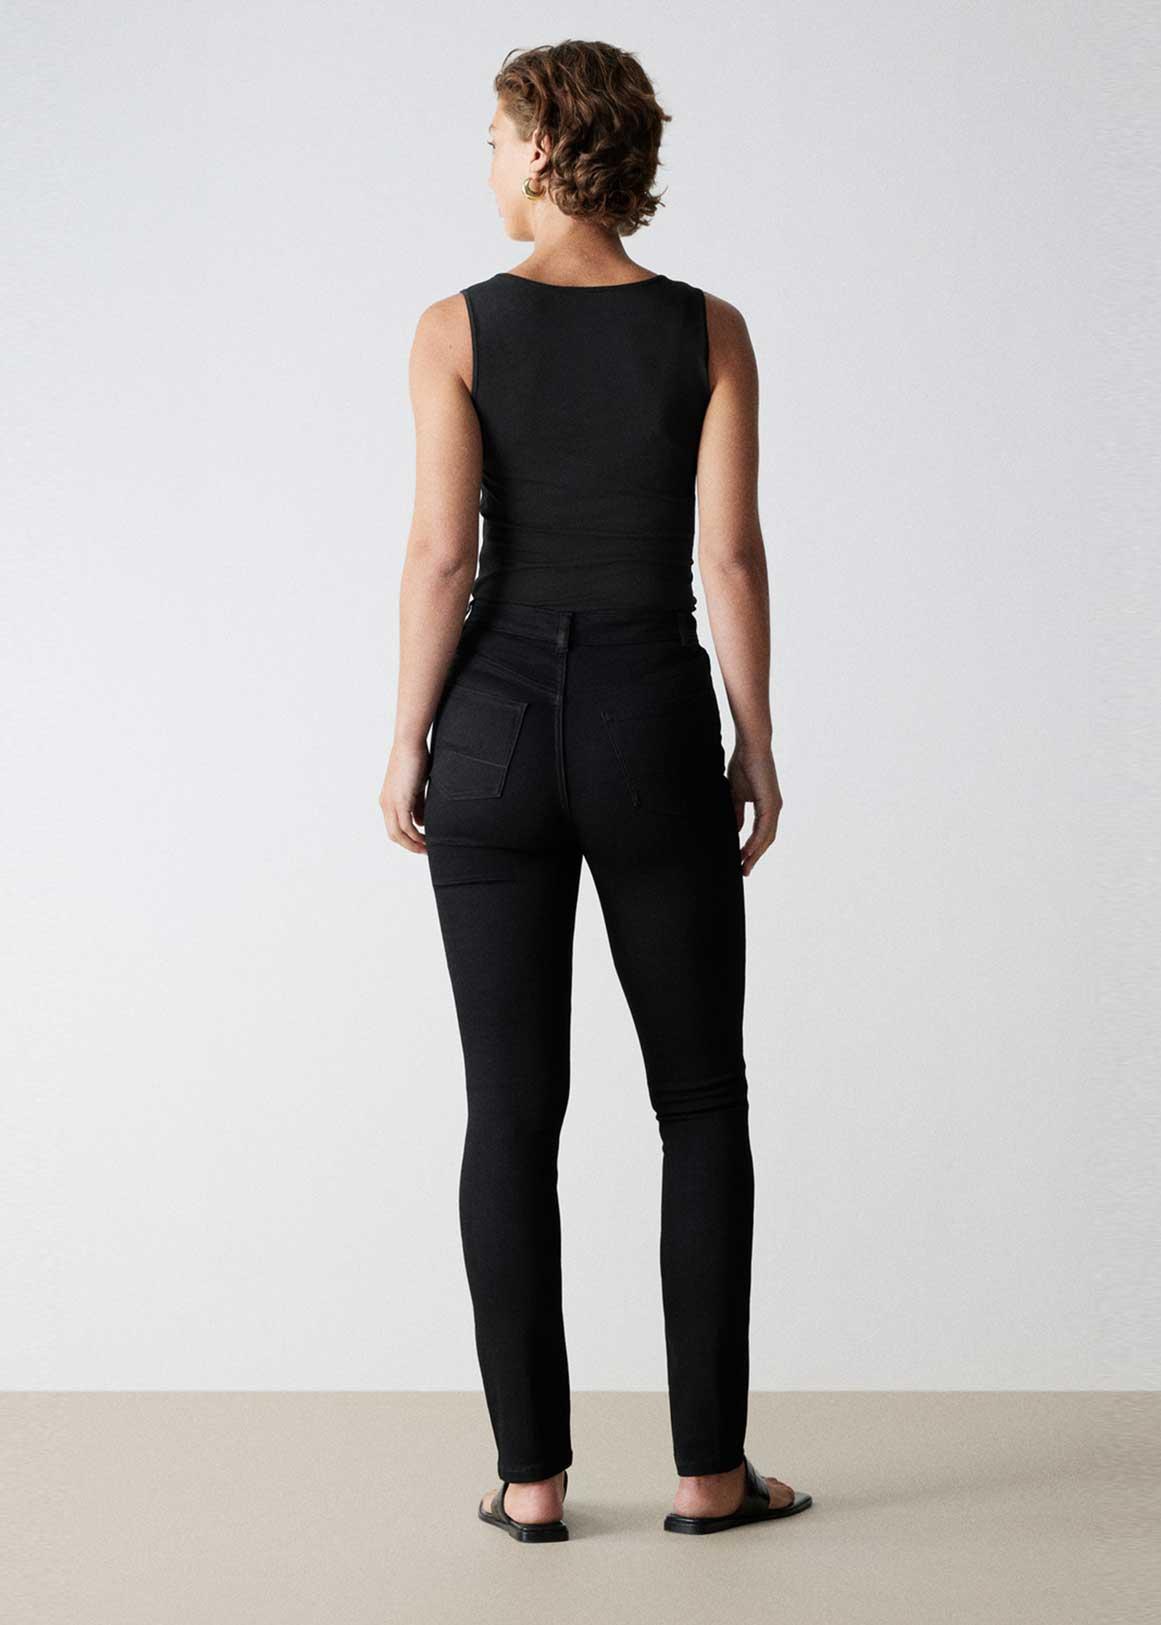 Country Road Organically Grown Cotton Jersey Legging Black